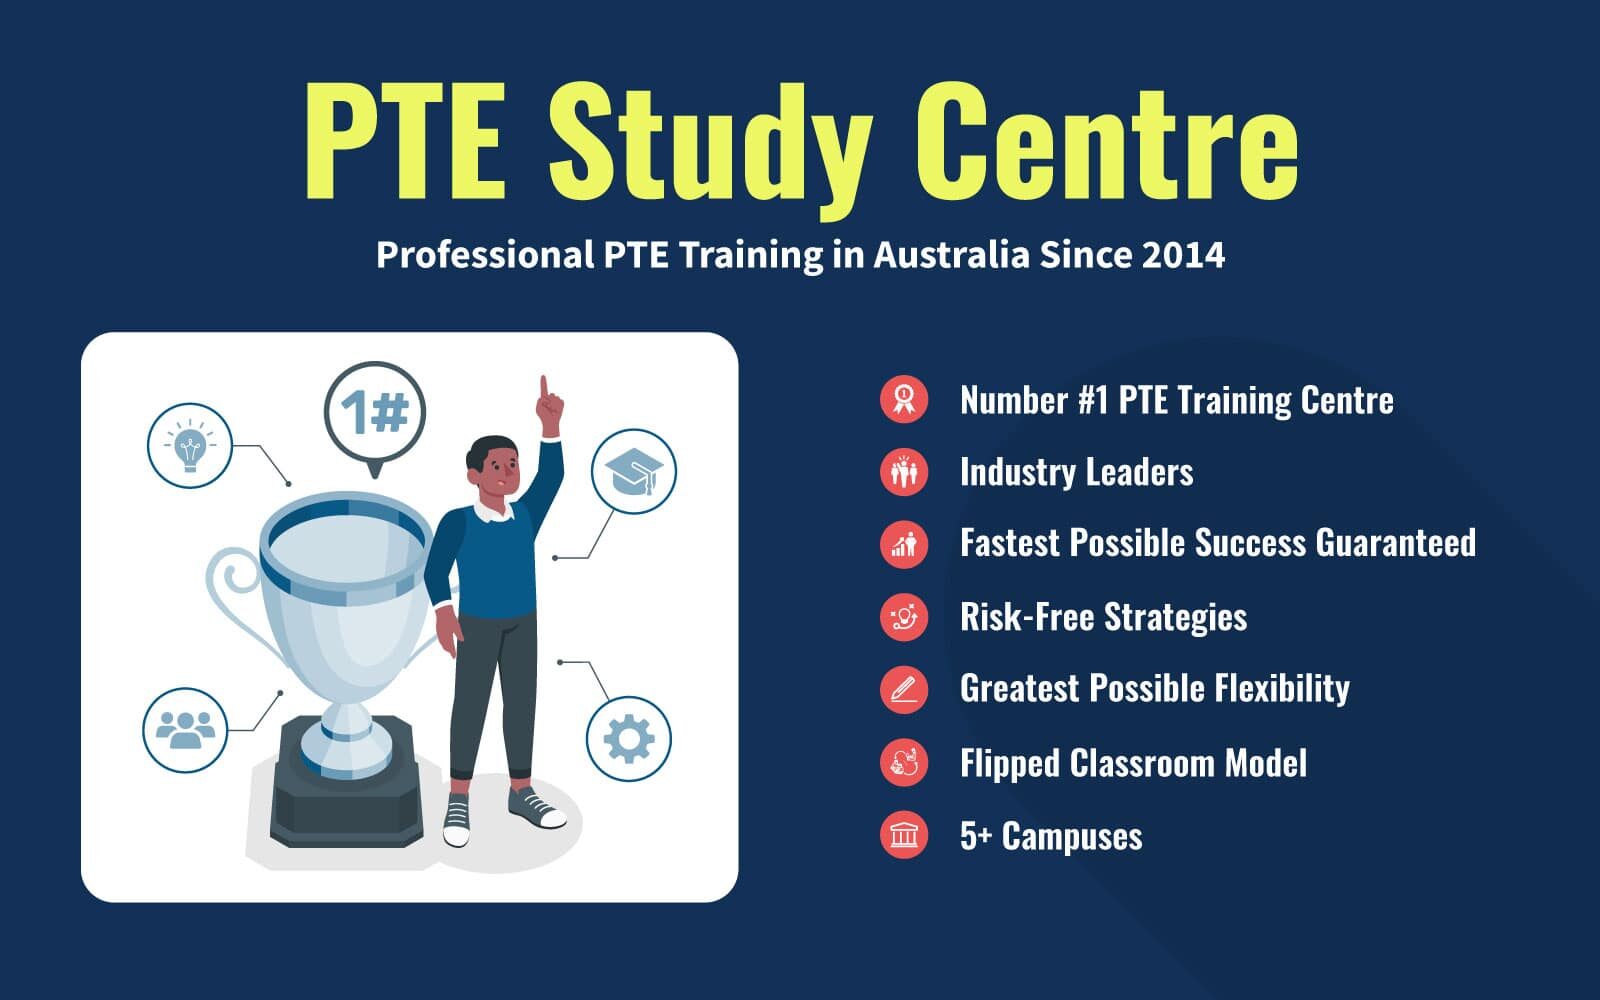 Why is PTE Study Centre the Best in Australia? image